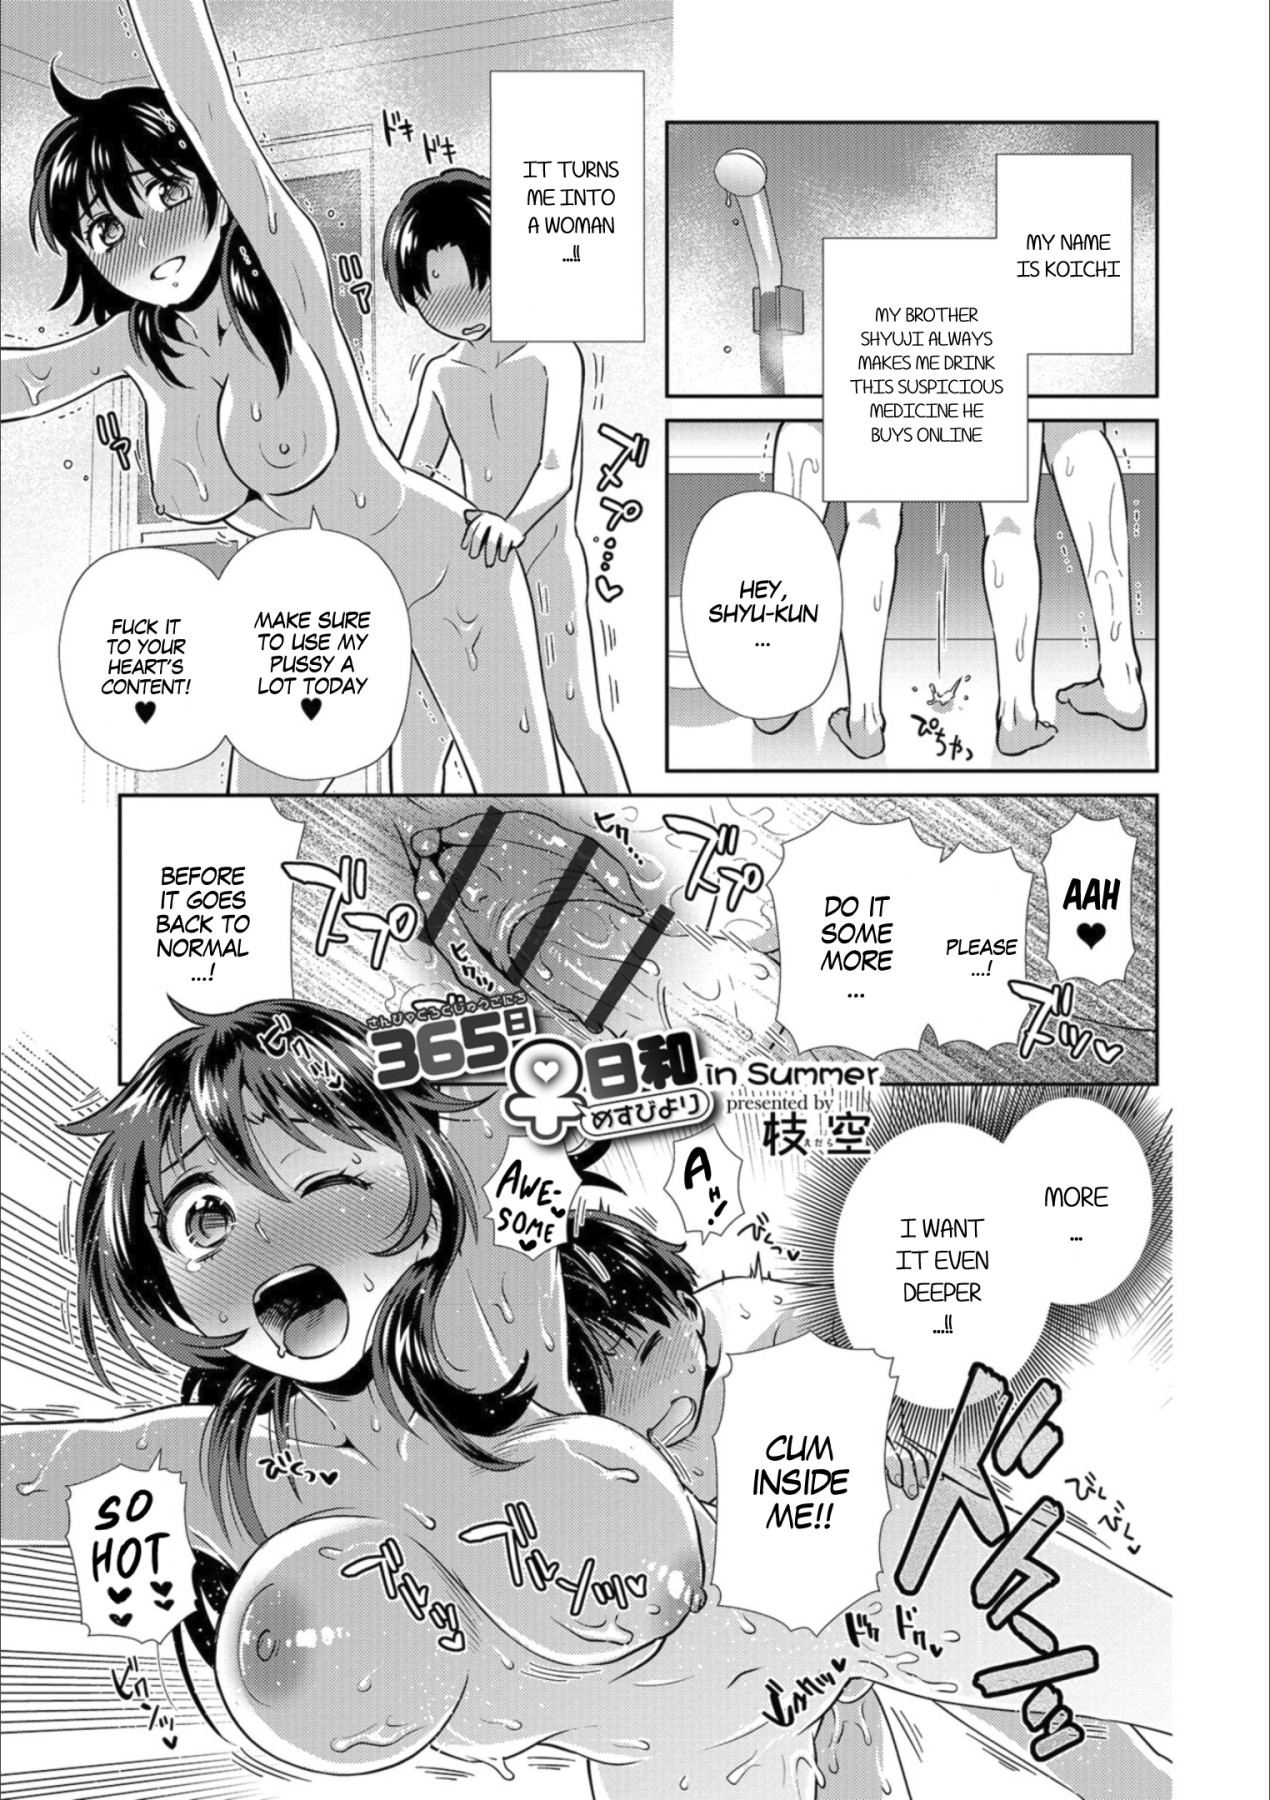 Hentai Manga Comic-Every Day is a Nice Day to Become a Bitch in Summer-Read-1